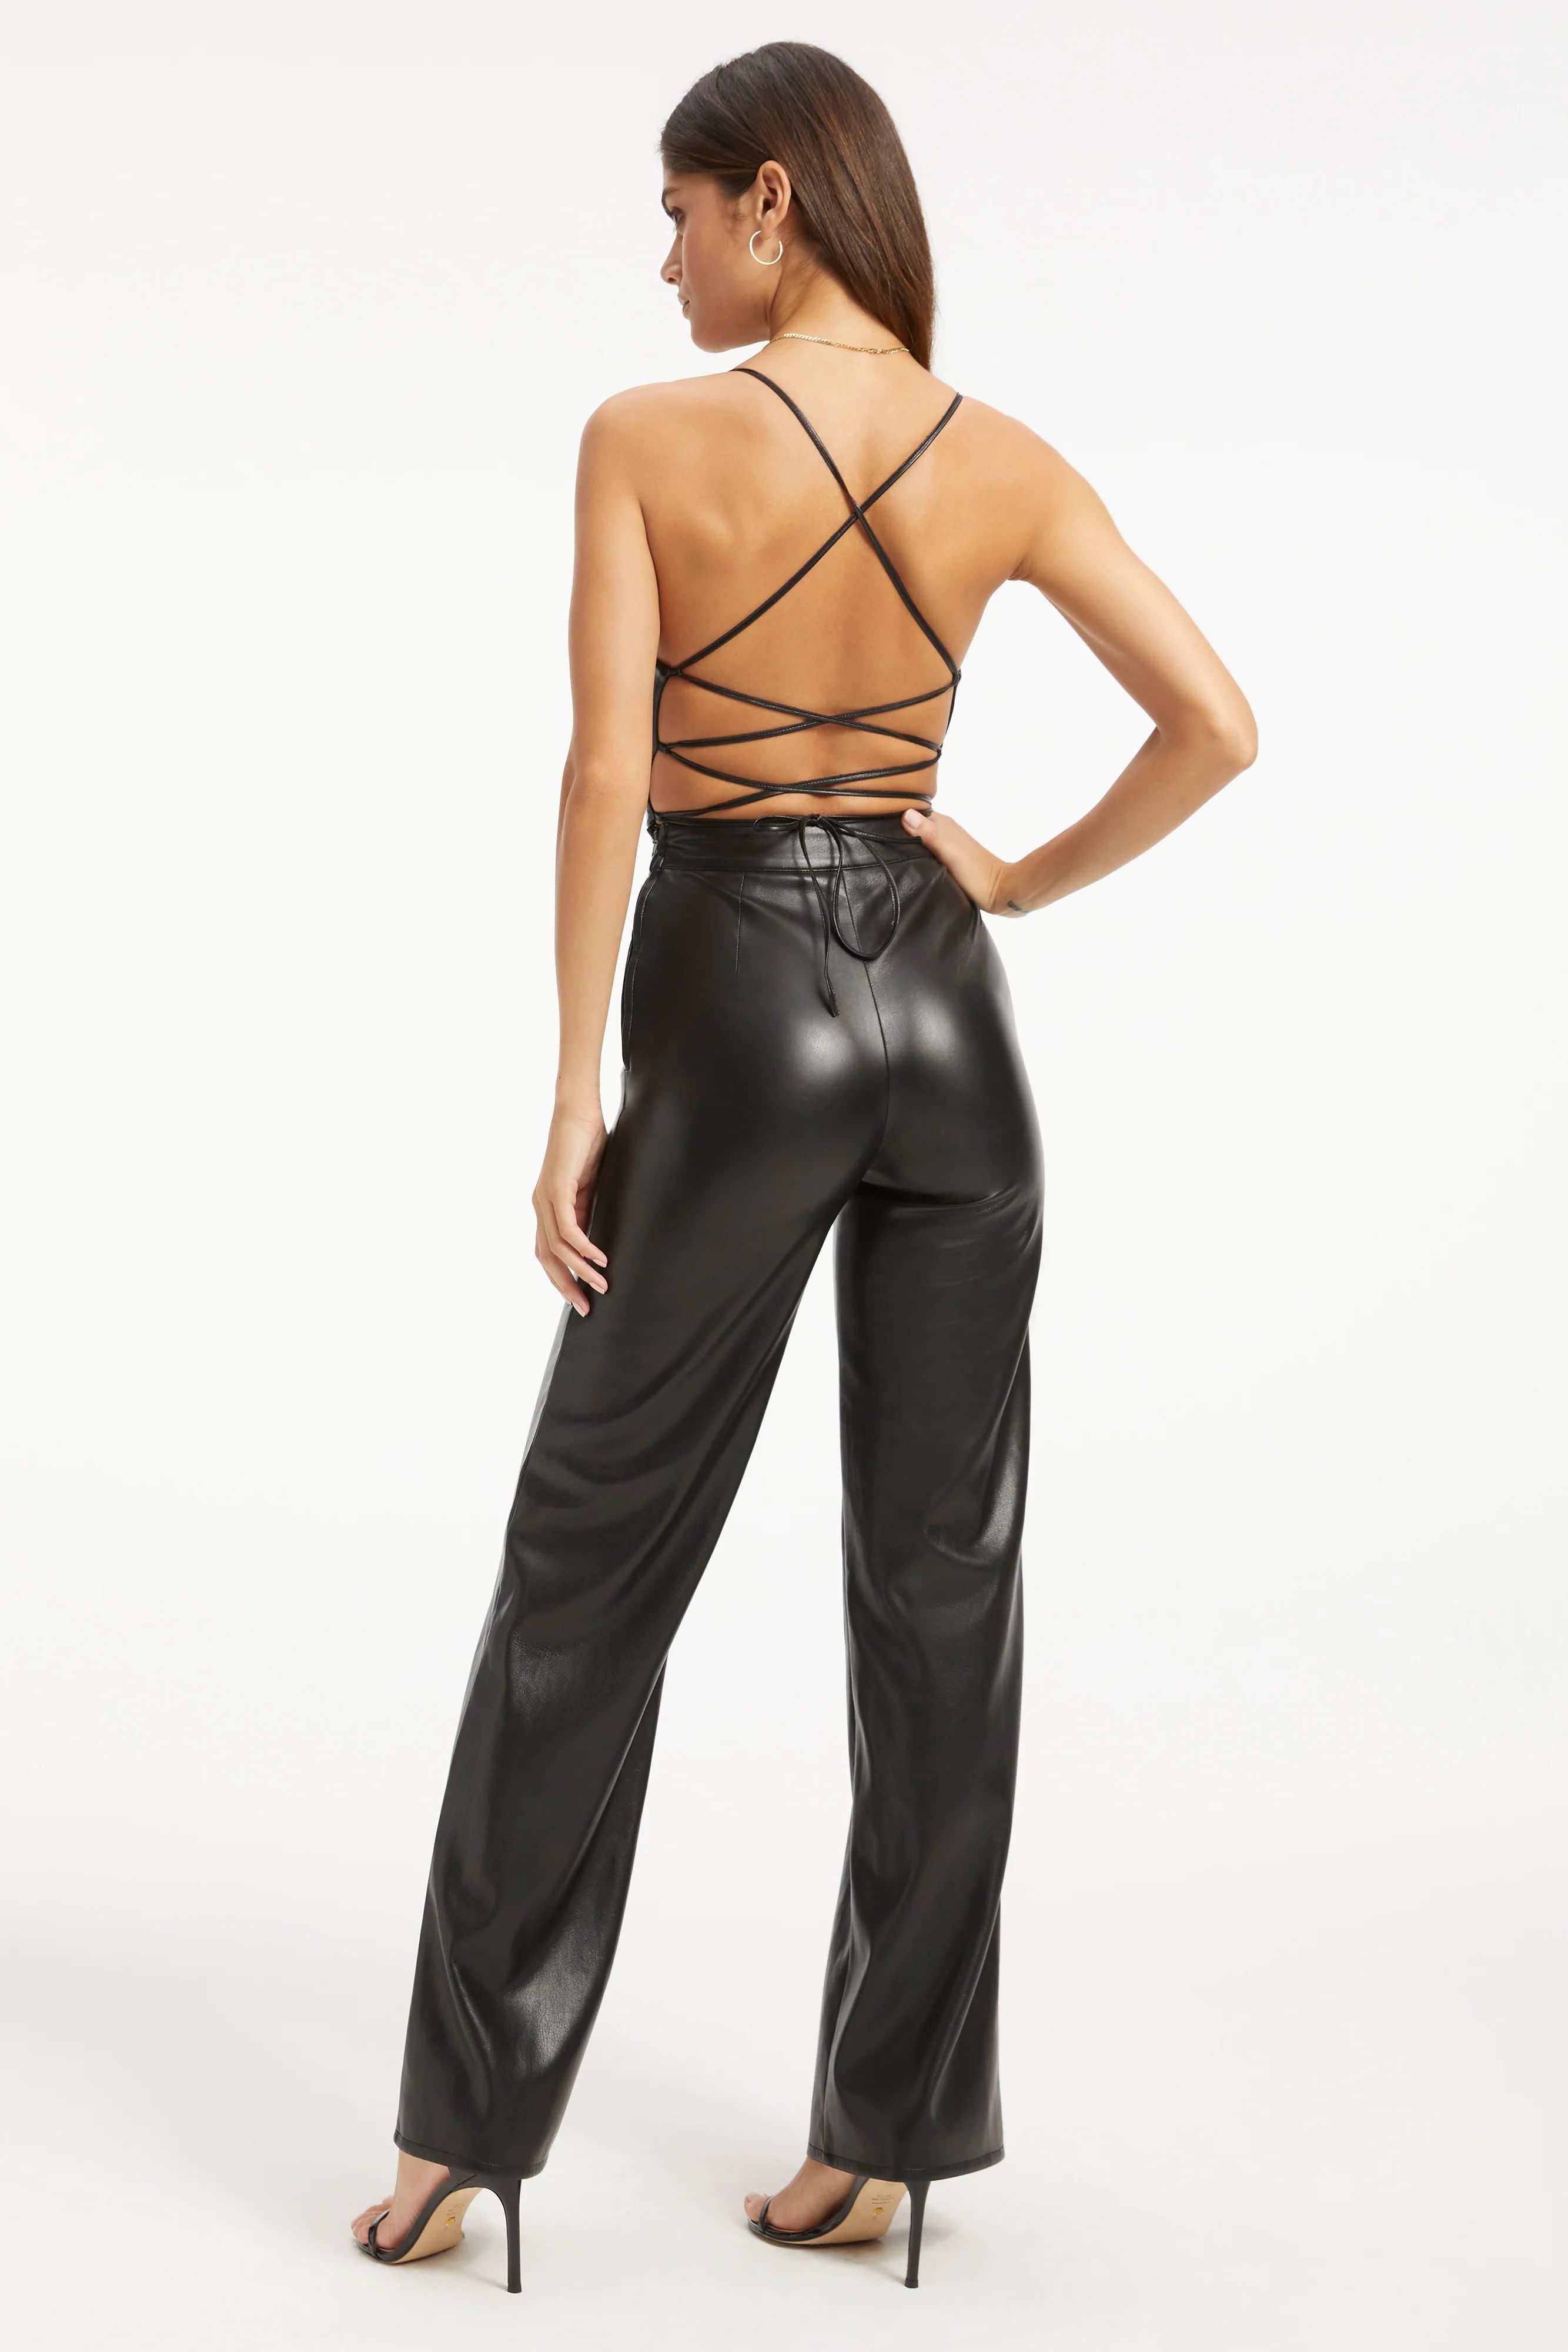 BETTER THAN LEATHER VACAY JUMPSUIT | BLACK001 | Good American